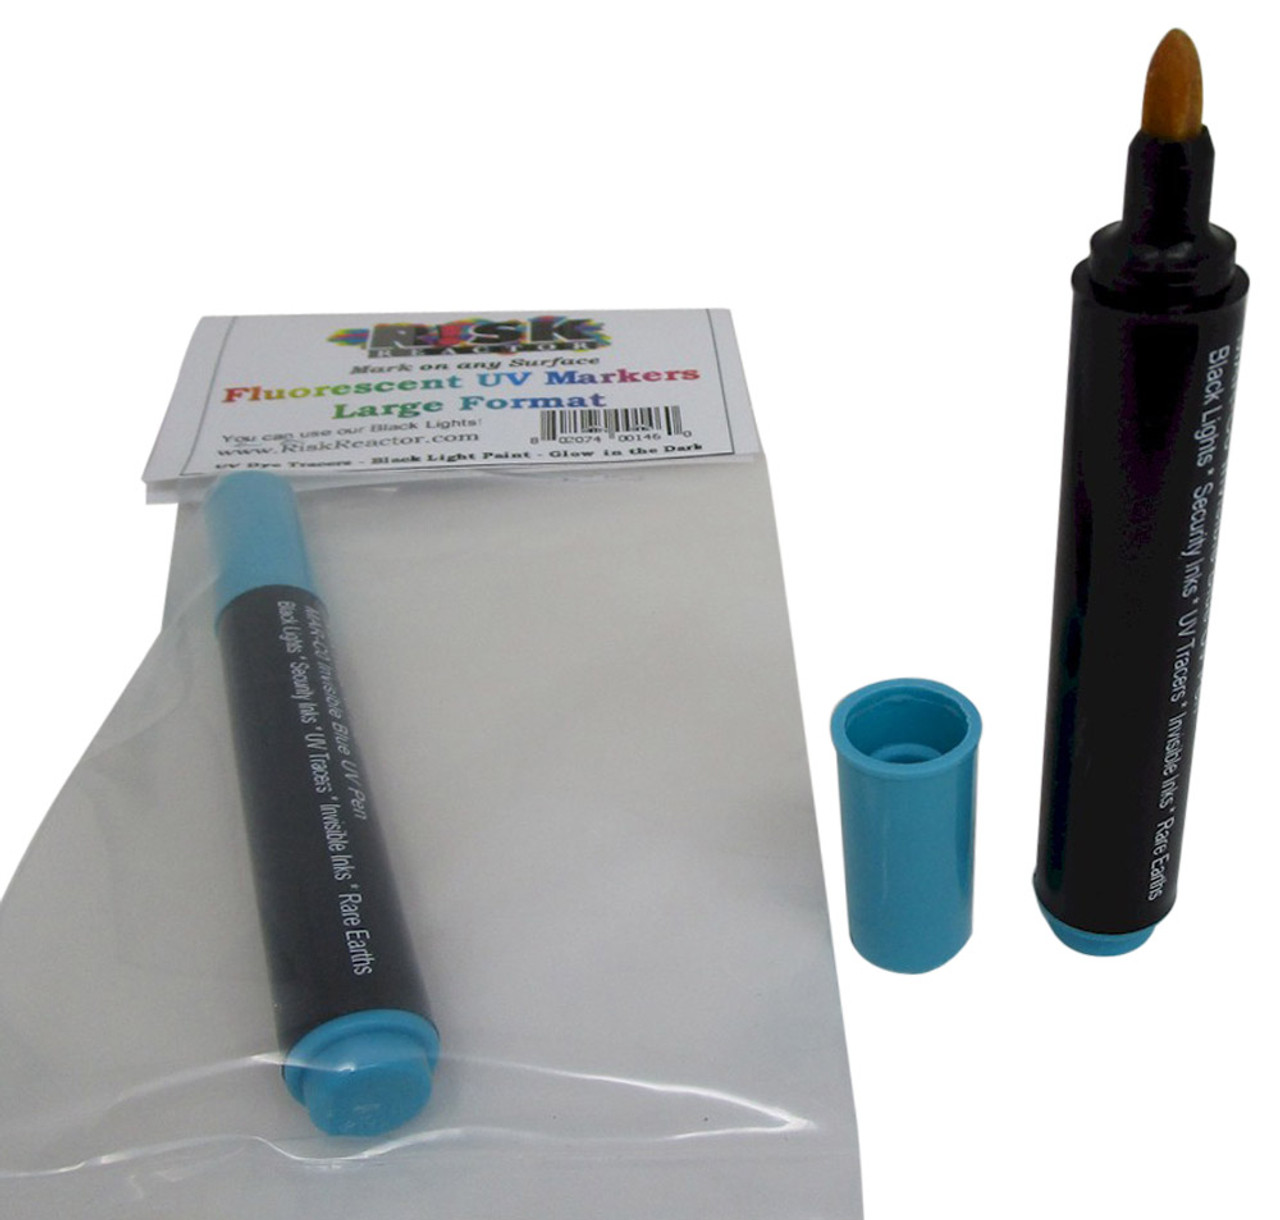 Markers That Glow With Black Lights